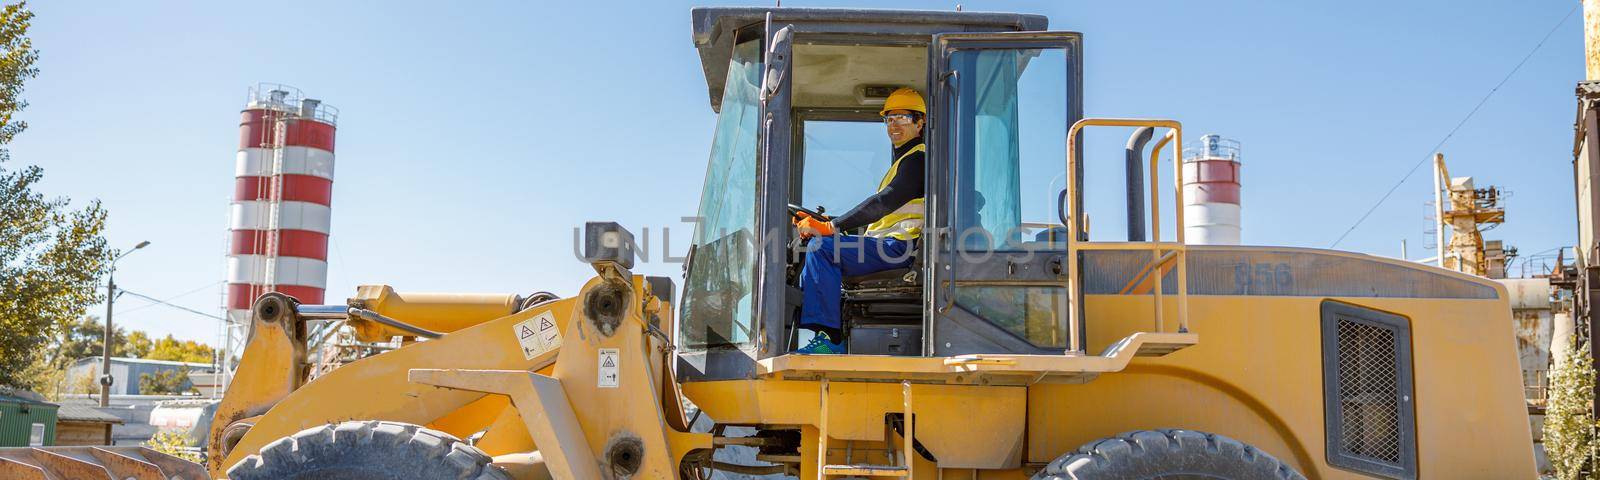 Joyful male worker looking at camera and smiling while sitting in tractor driver cabin at industrial plant